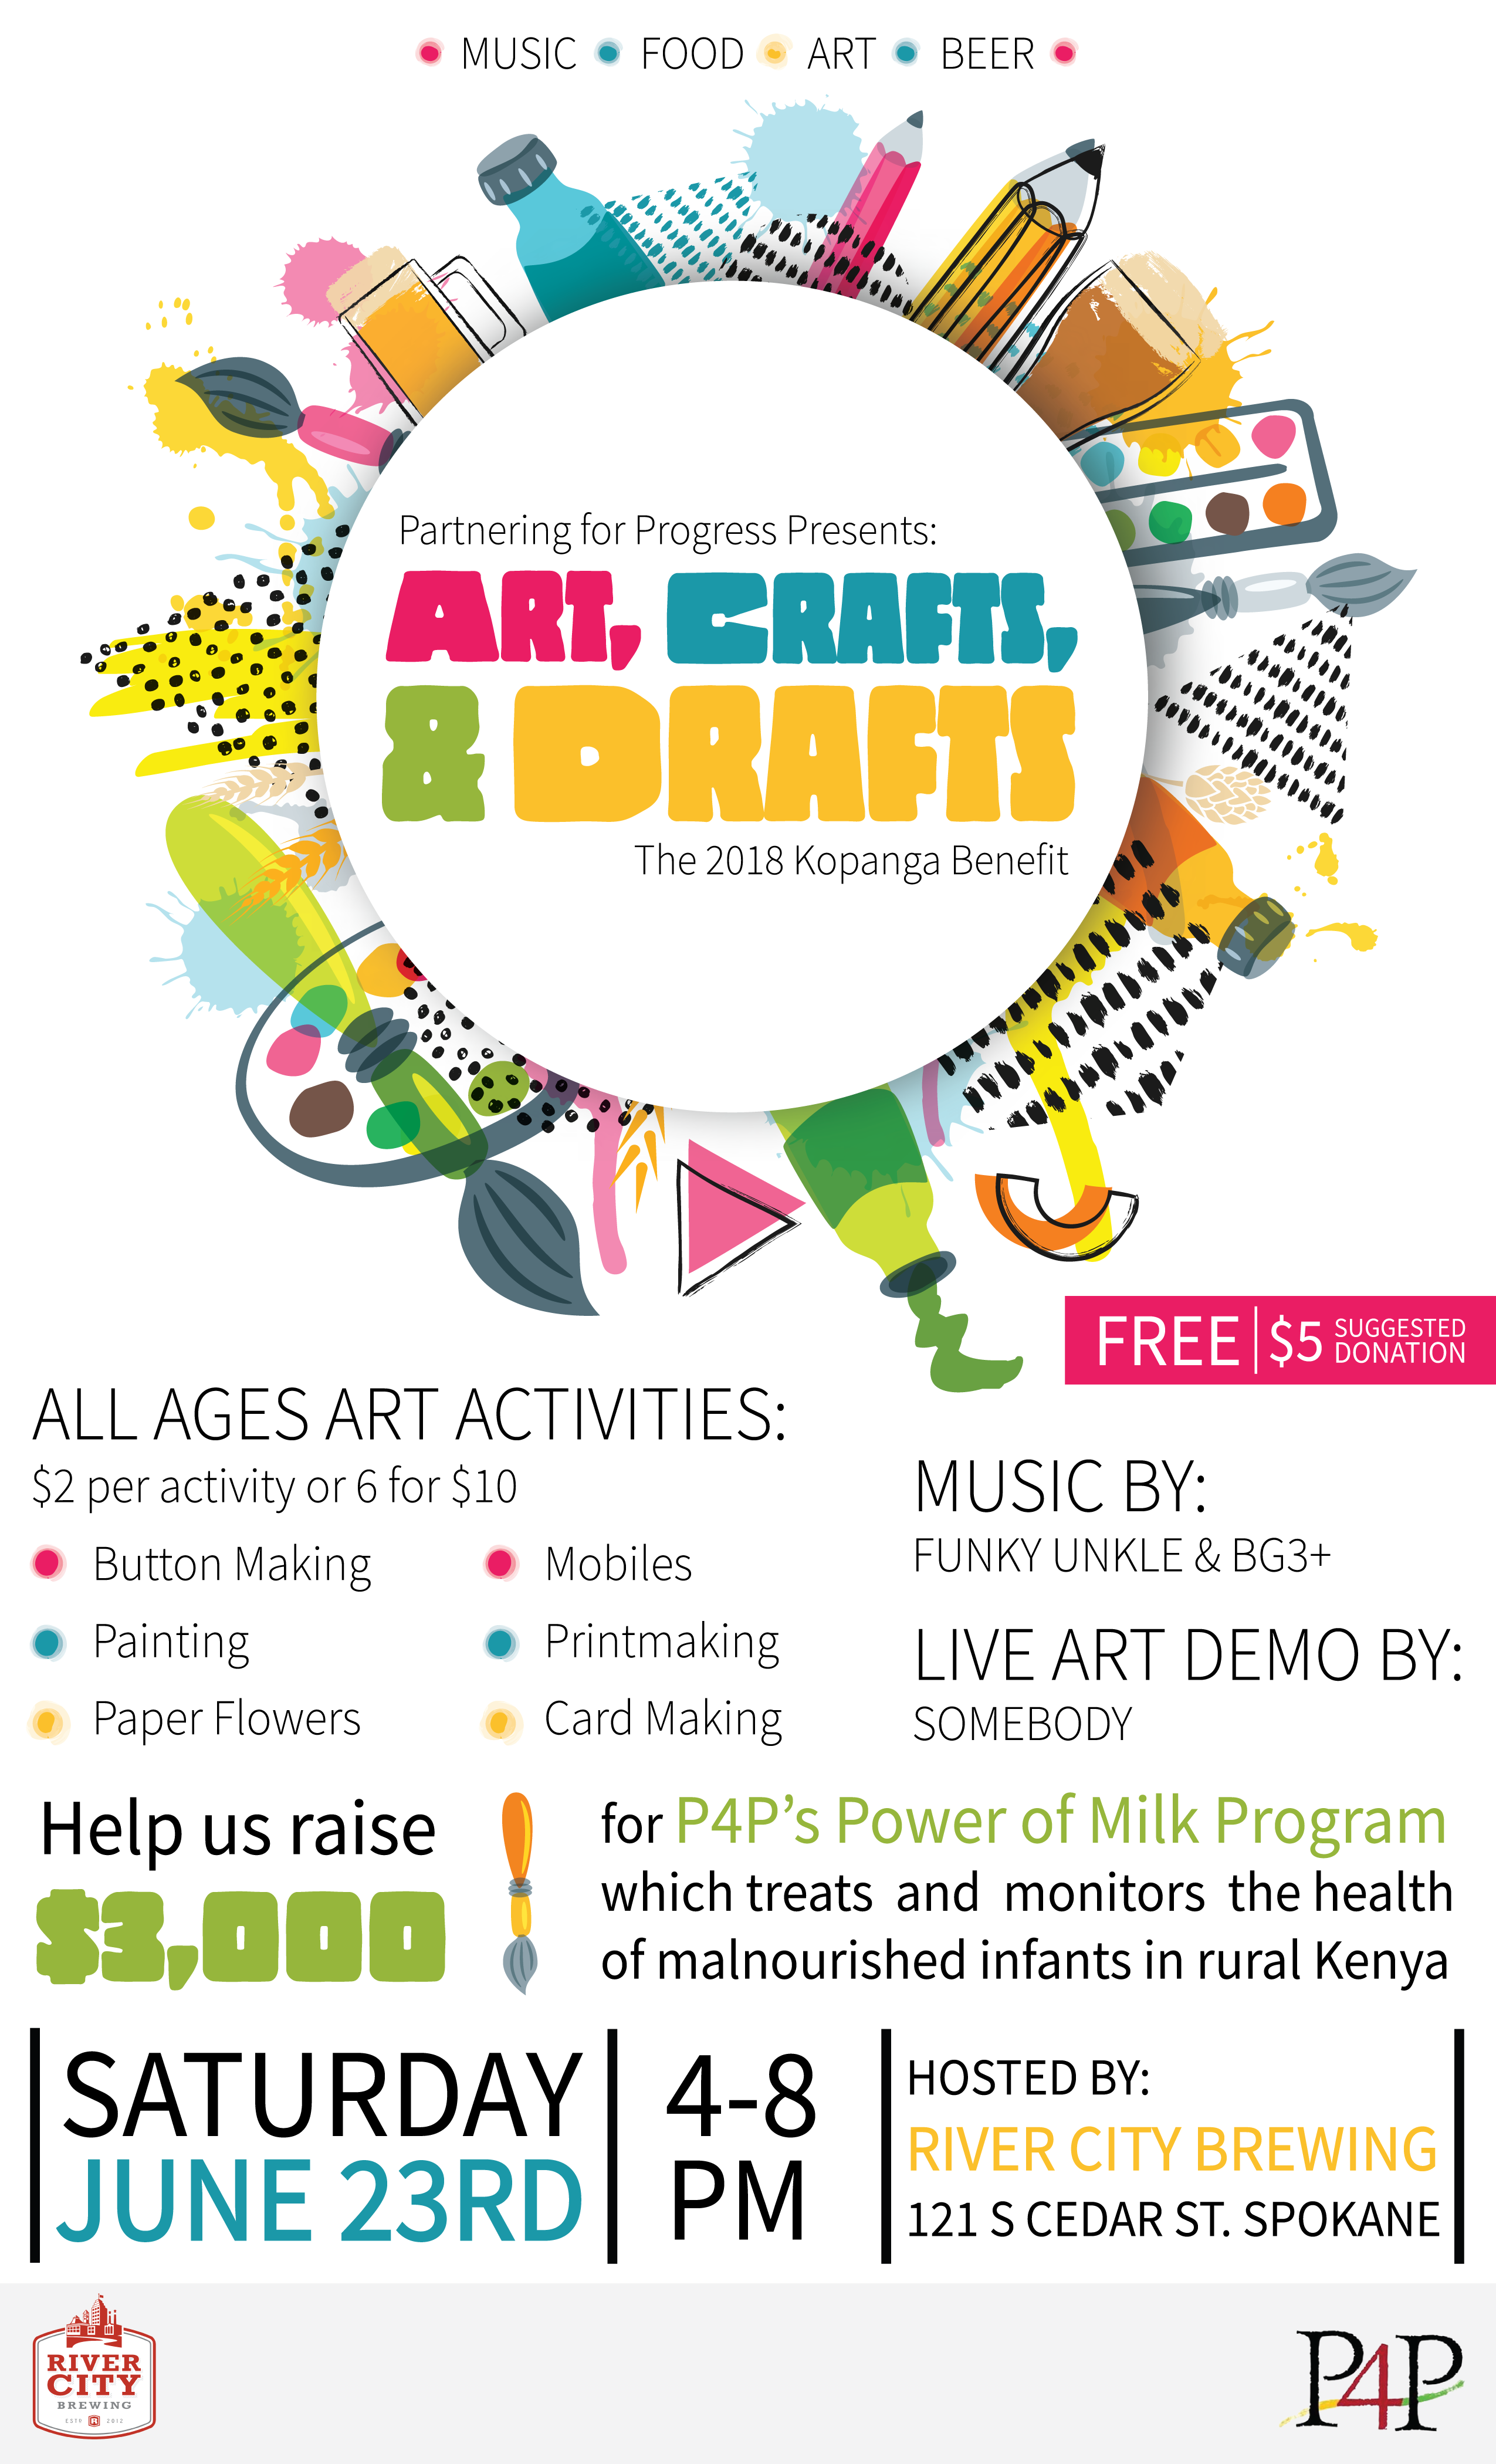 Arts, Crafts & Drafts, June 23rd 4-8 PM River City Brewing. Get your FUN on!